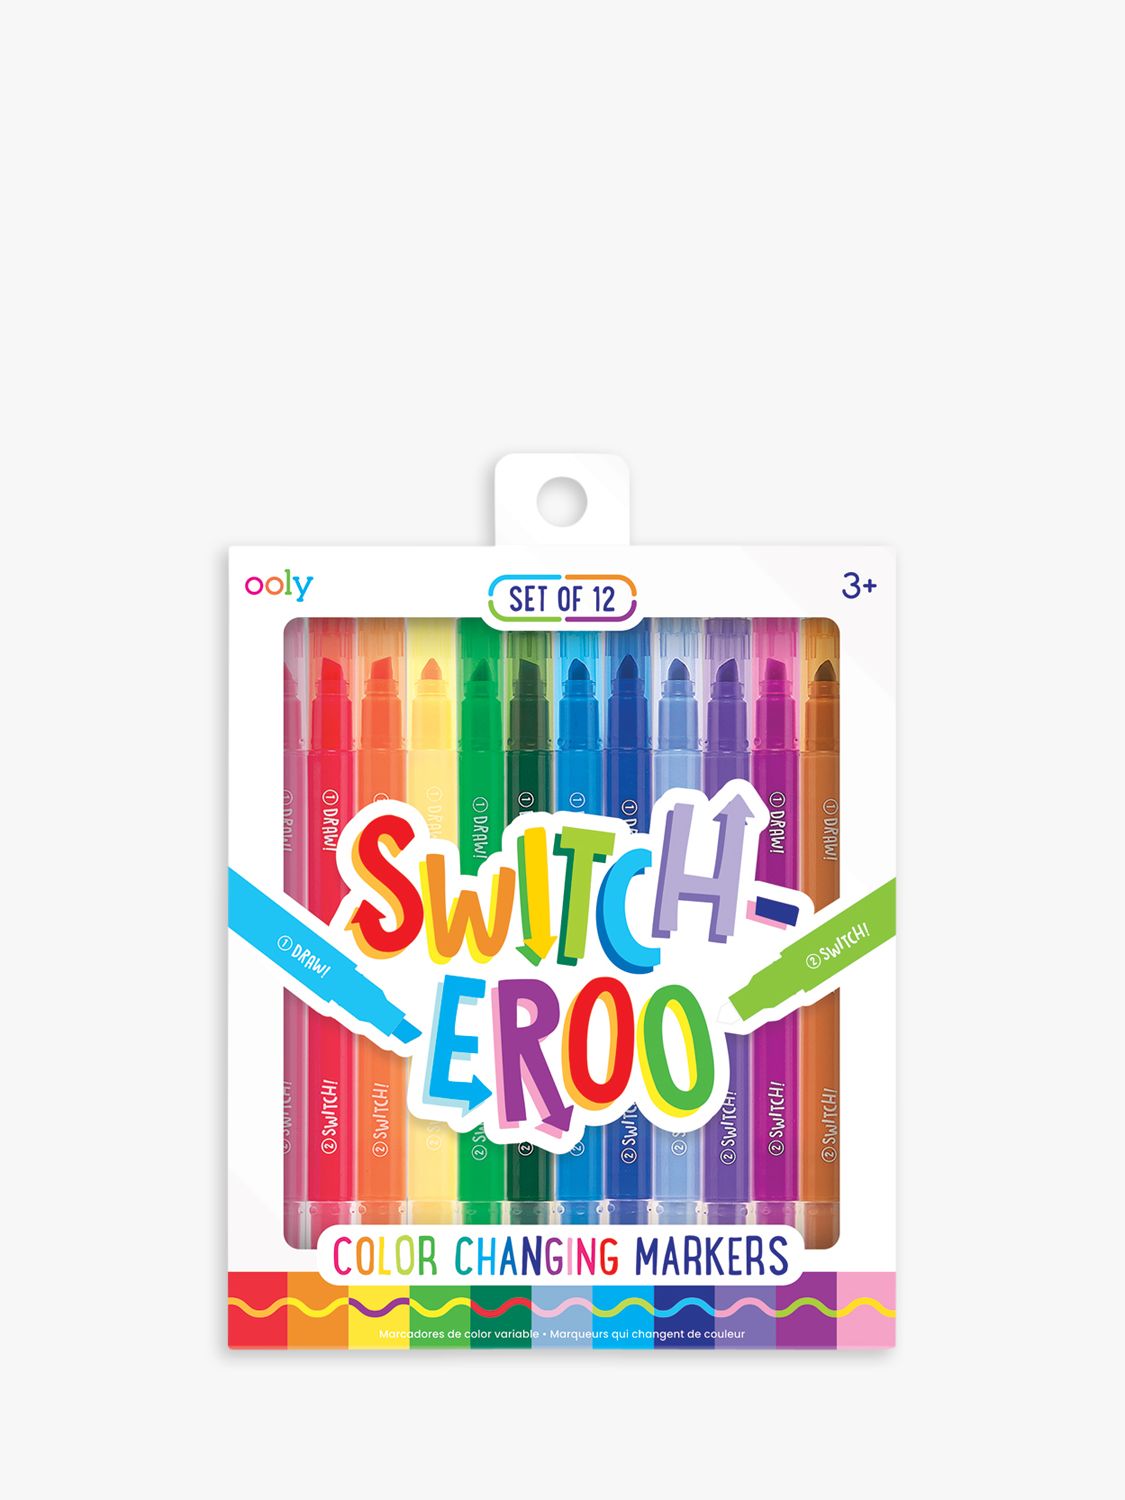 Ooly 24 Pack Switch-eroo Double Sided Color Changing Markers in Vibrant  Colors, Color Changeable Markers are Cool Back to School Supplies for Art